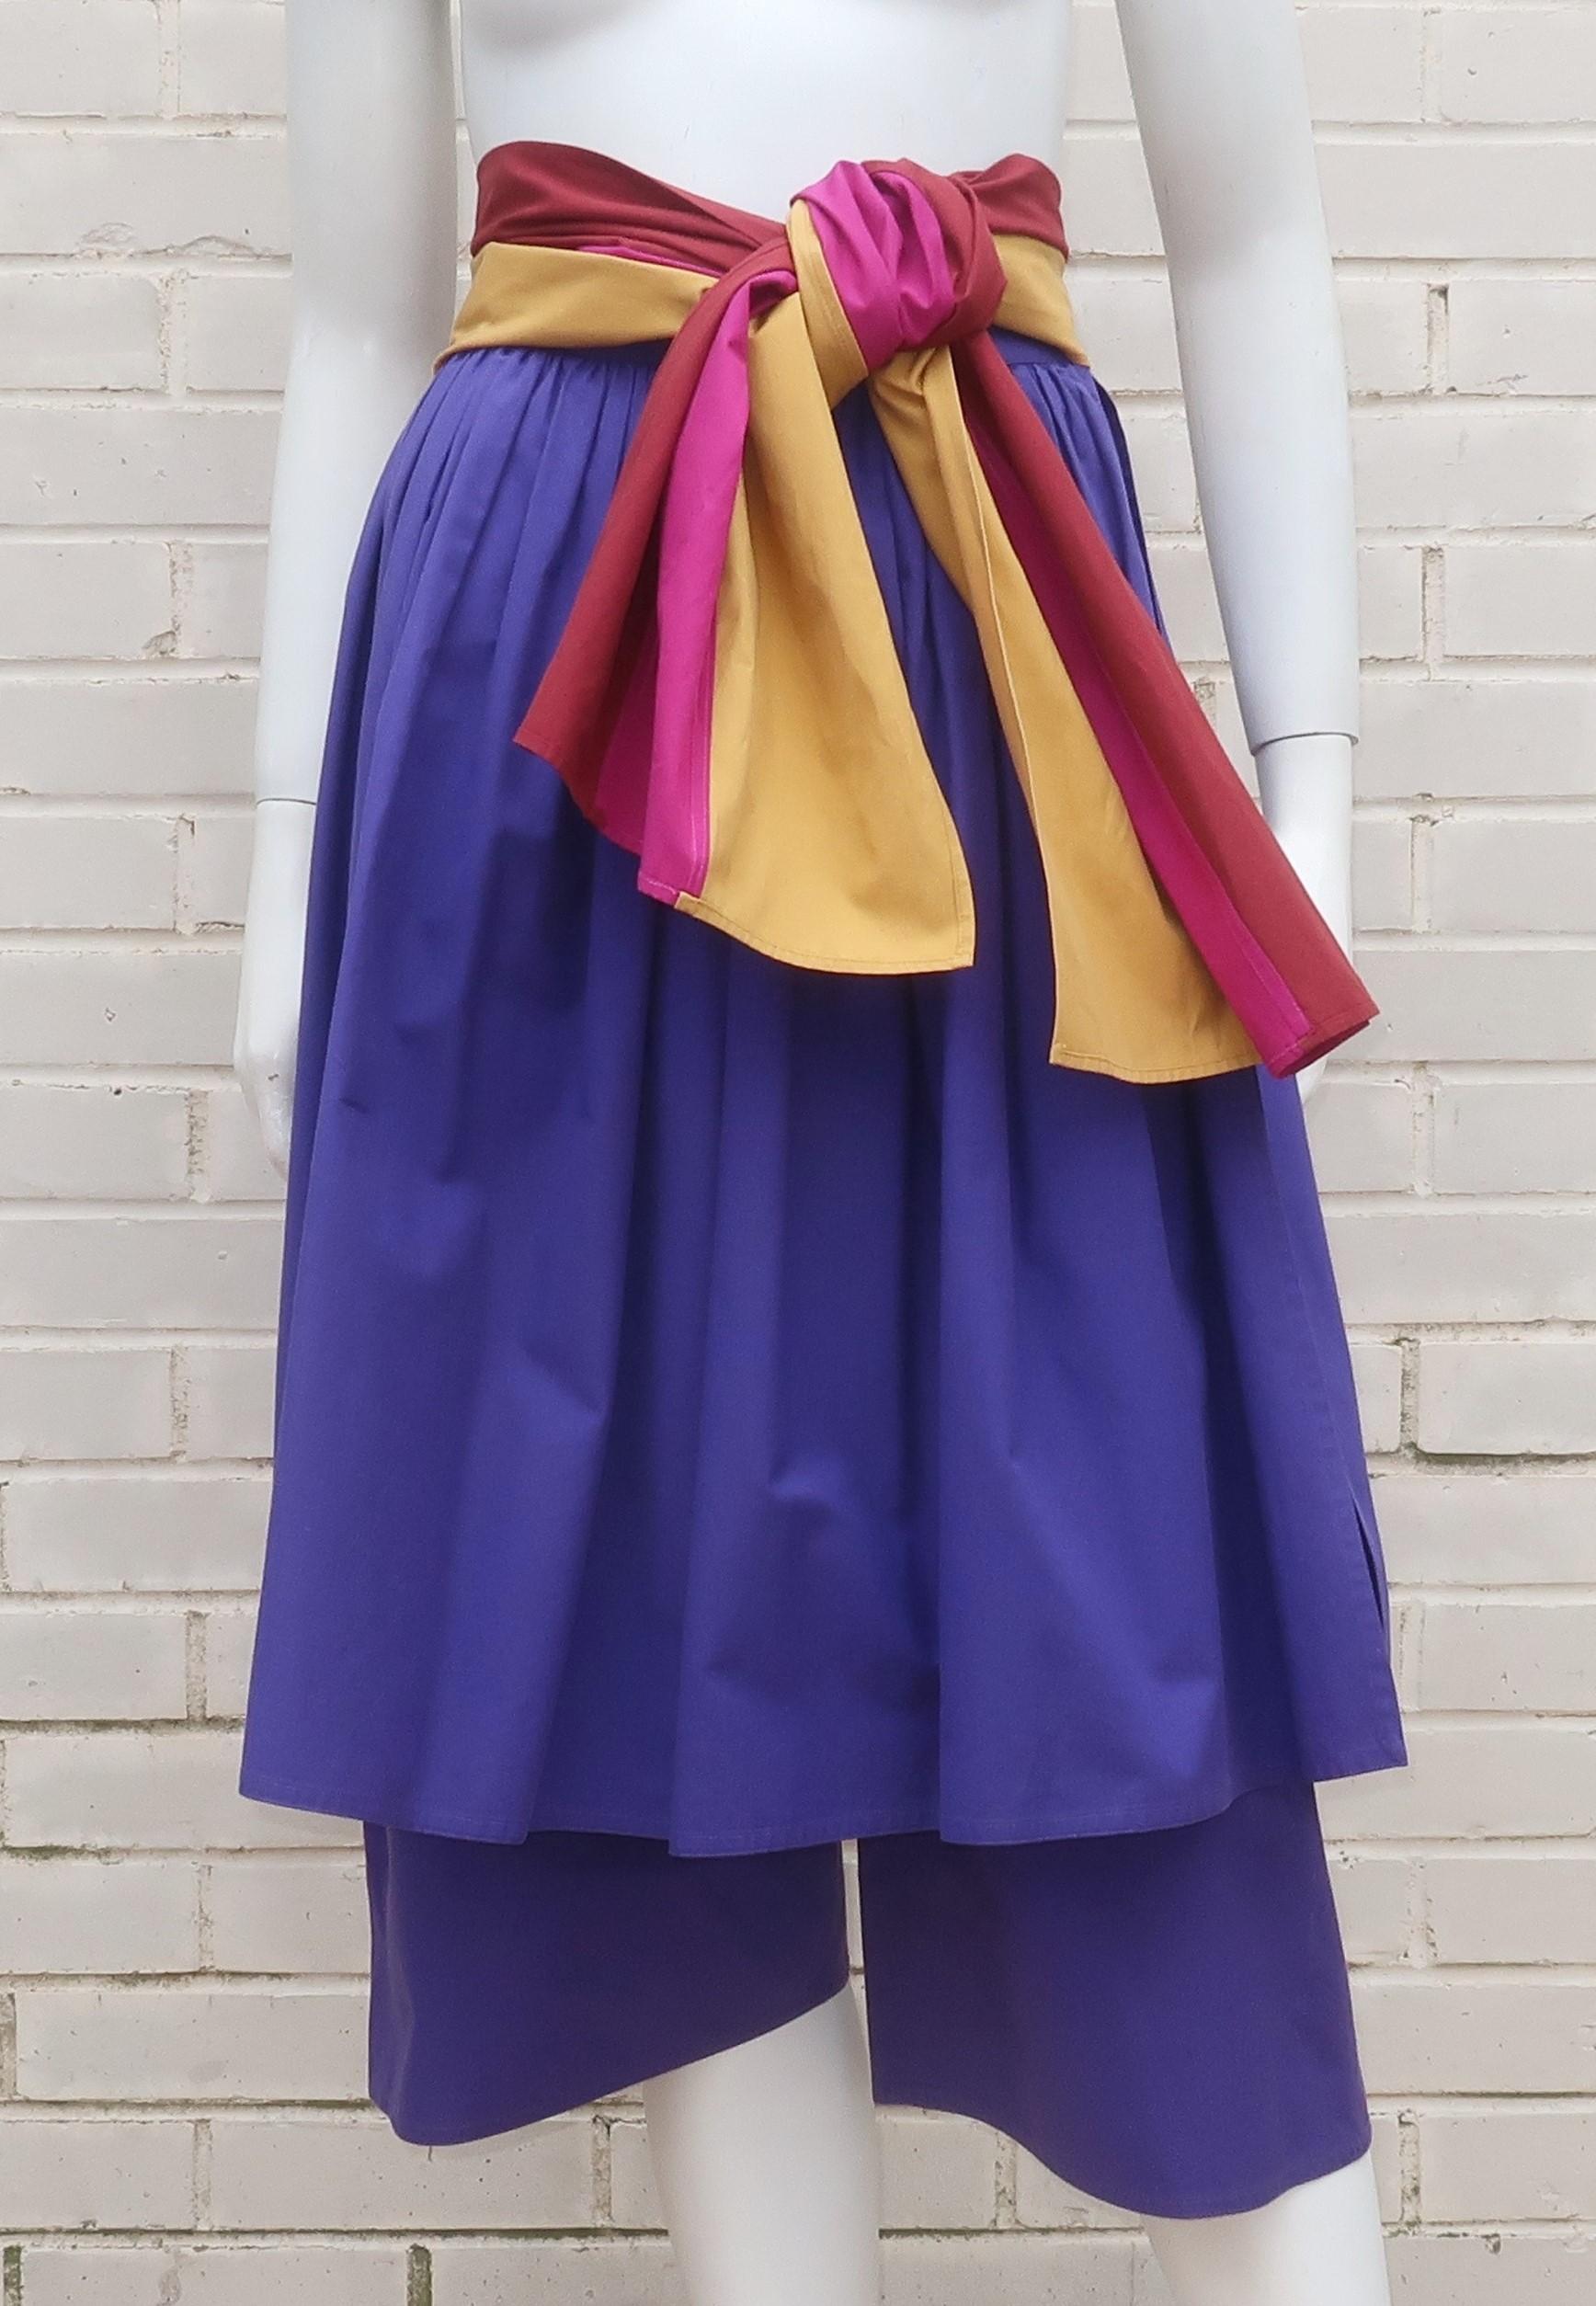 This summery 1970's confection from Gucci combines colorful cotton with a unique silhouette to provide a fun design.  The contrasting color combination of royal purple with a built-in striped sash of goldenrod, fuchsia and burgundy is a knockout. 